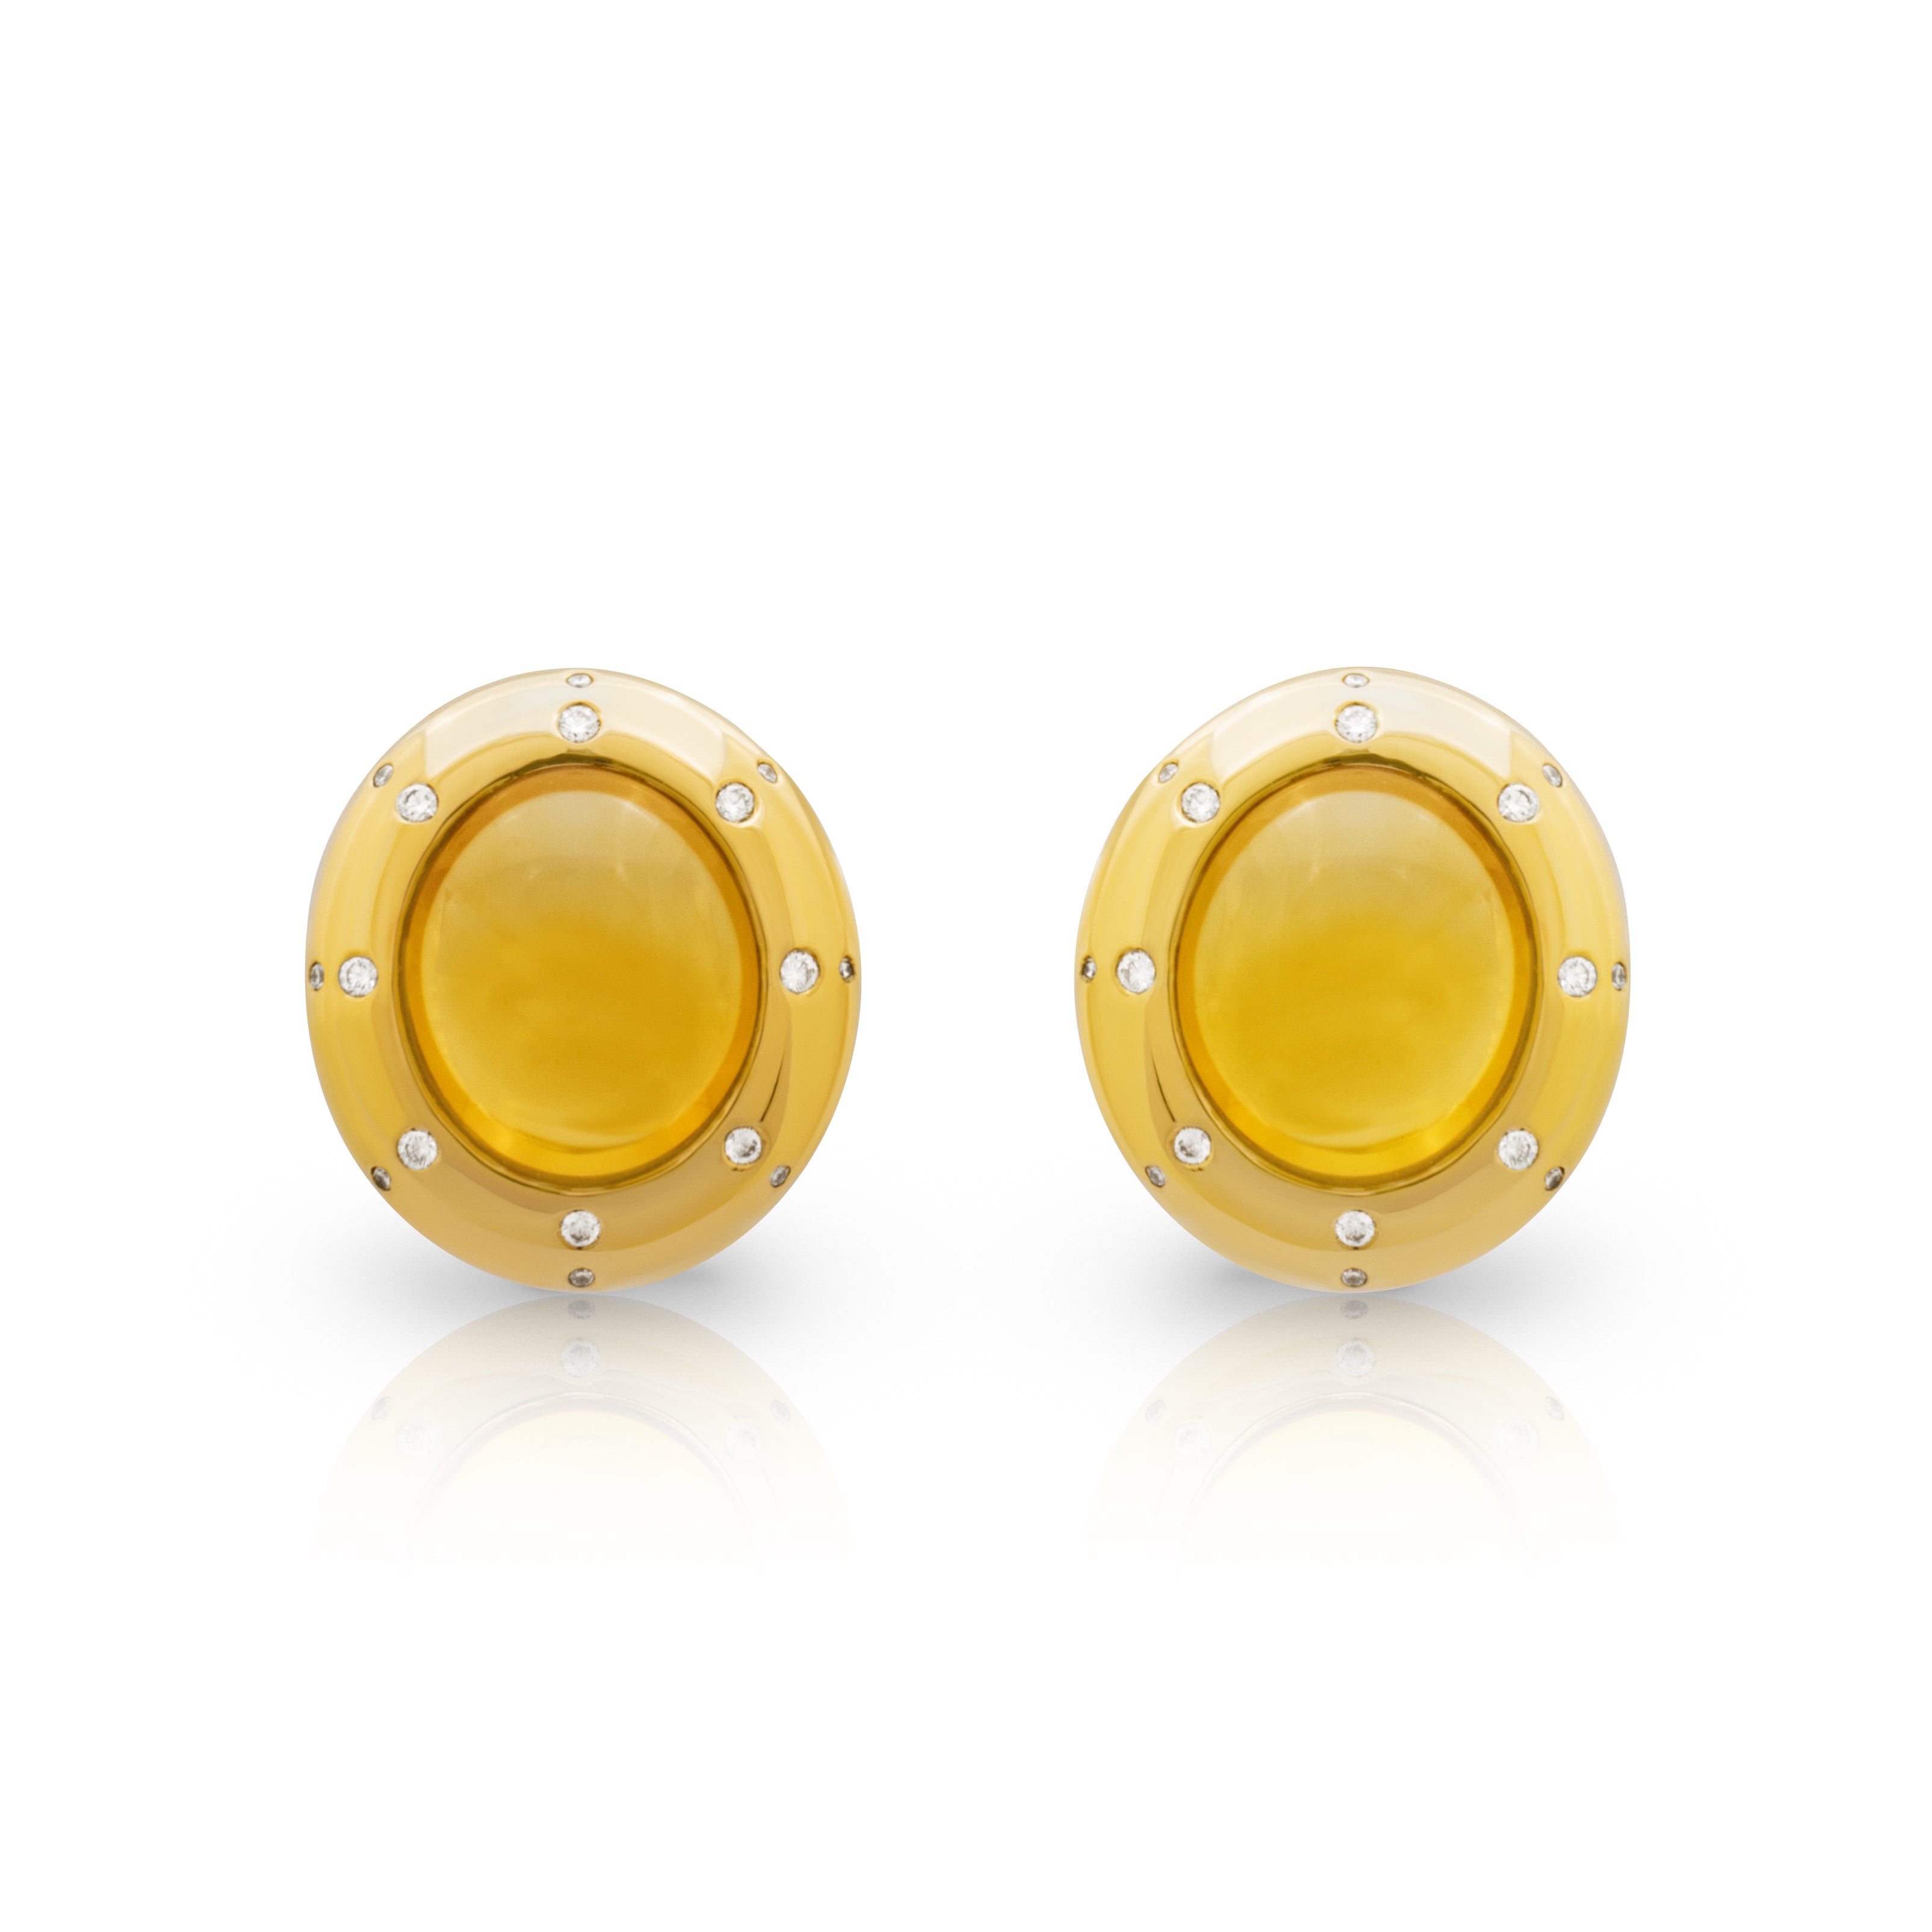 Yellow Obsession Earrings. Citrine & Diamond Obsession Earrings. Serena Ansell Fine Jewellery. 